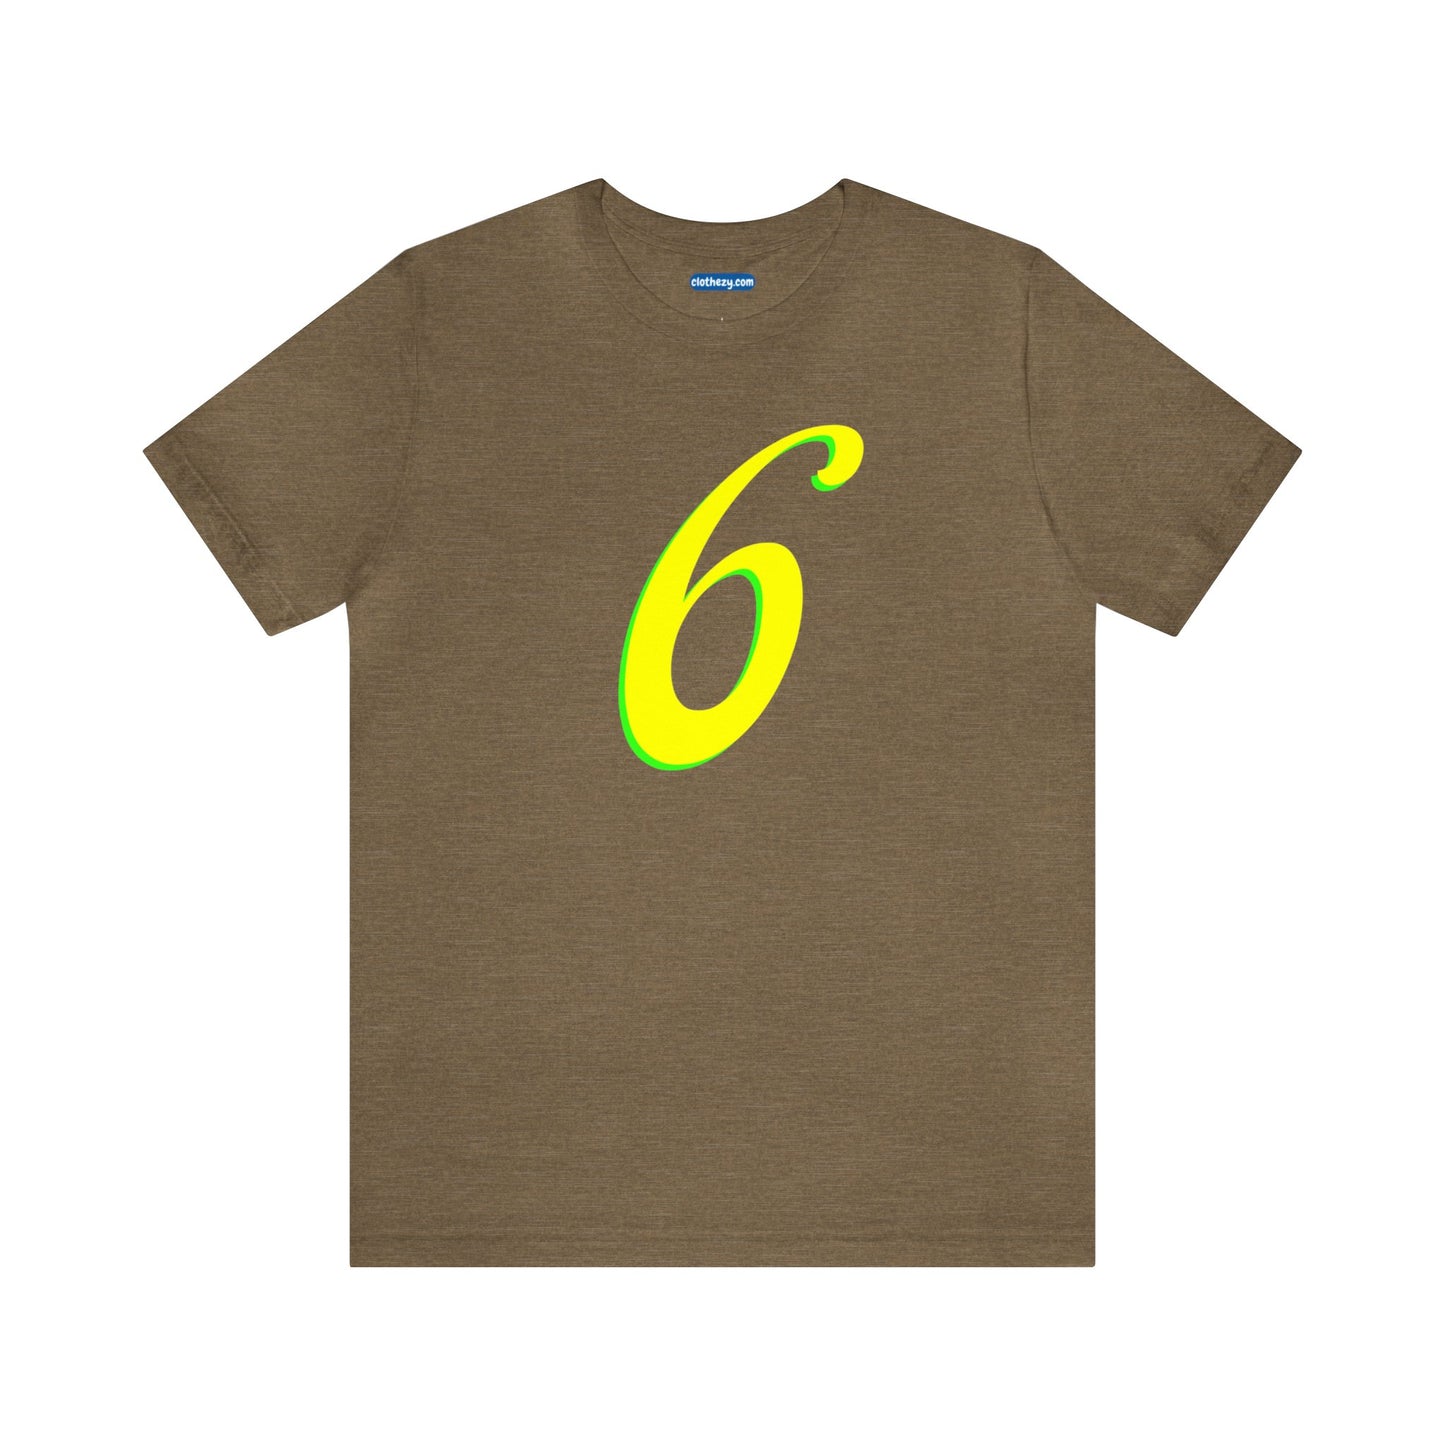 Number 6 Design - Soft Cotton Tee for birthdays and celebrations, Gift for friends and family, Multiple Options by clothezy.com in Asphalt Size Small - Buy Now